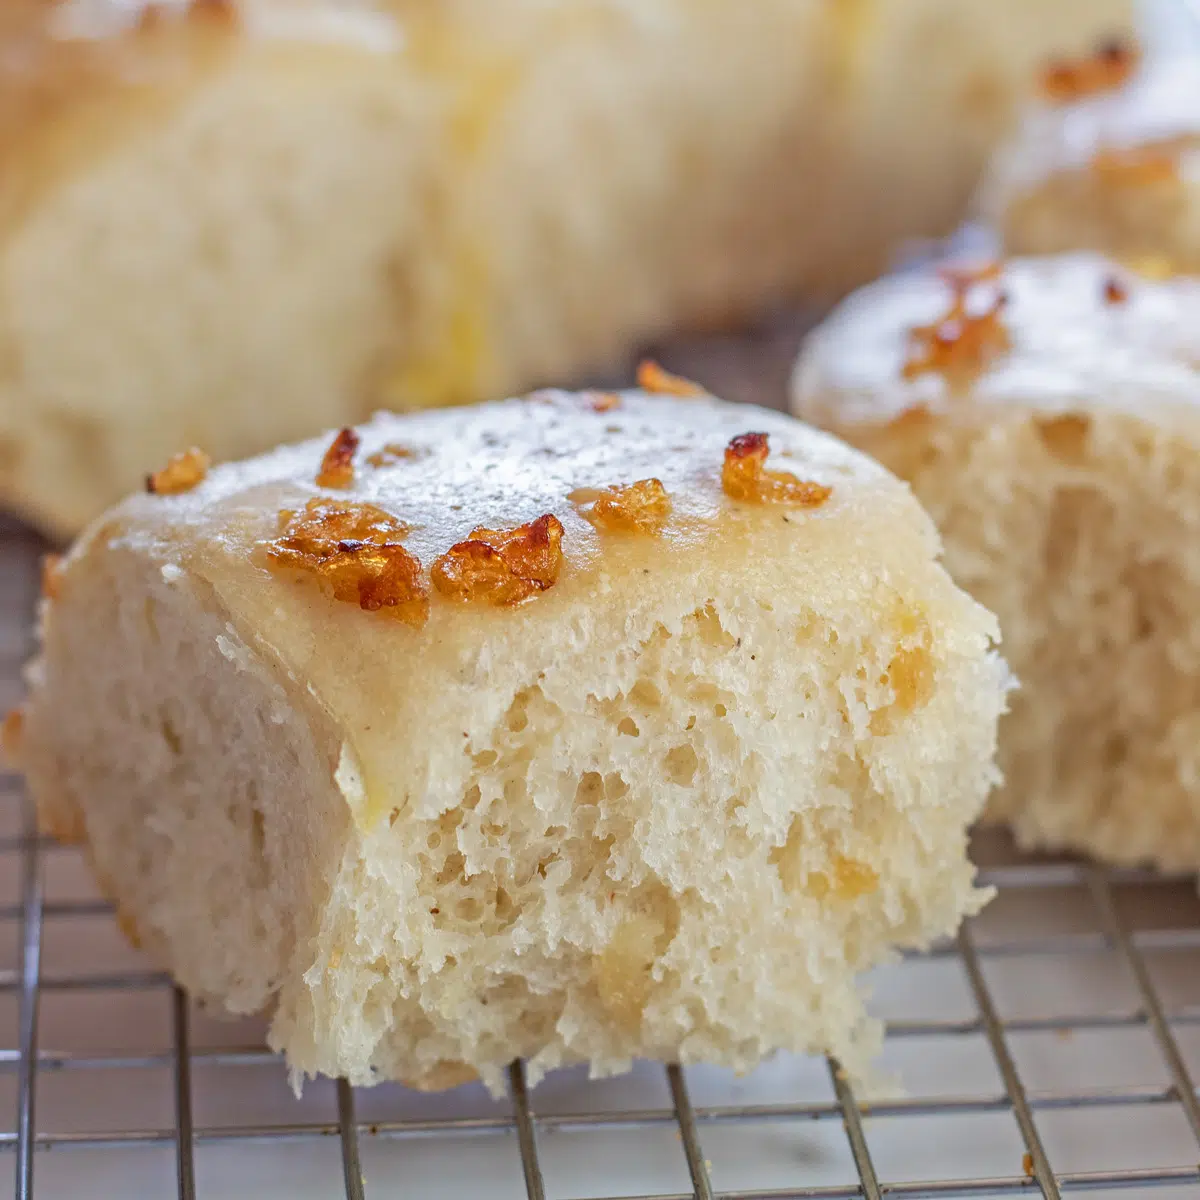 Best no knead onion rolls bake up tender and fluffy with rich, savory flavor.